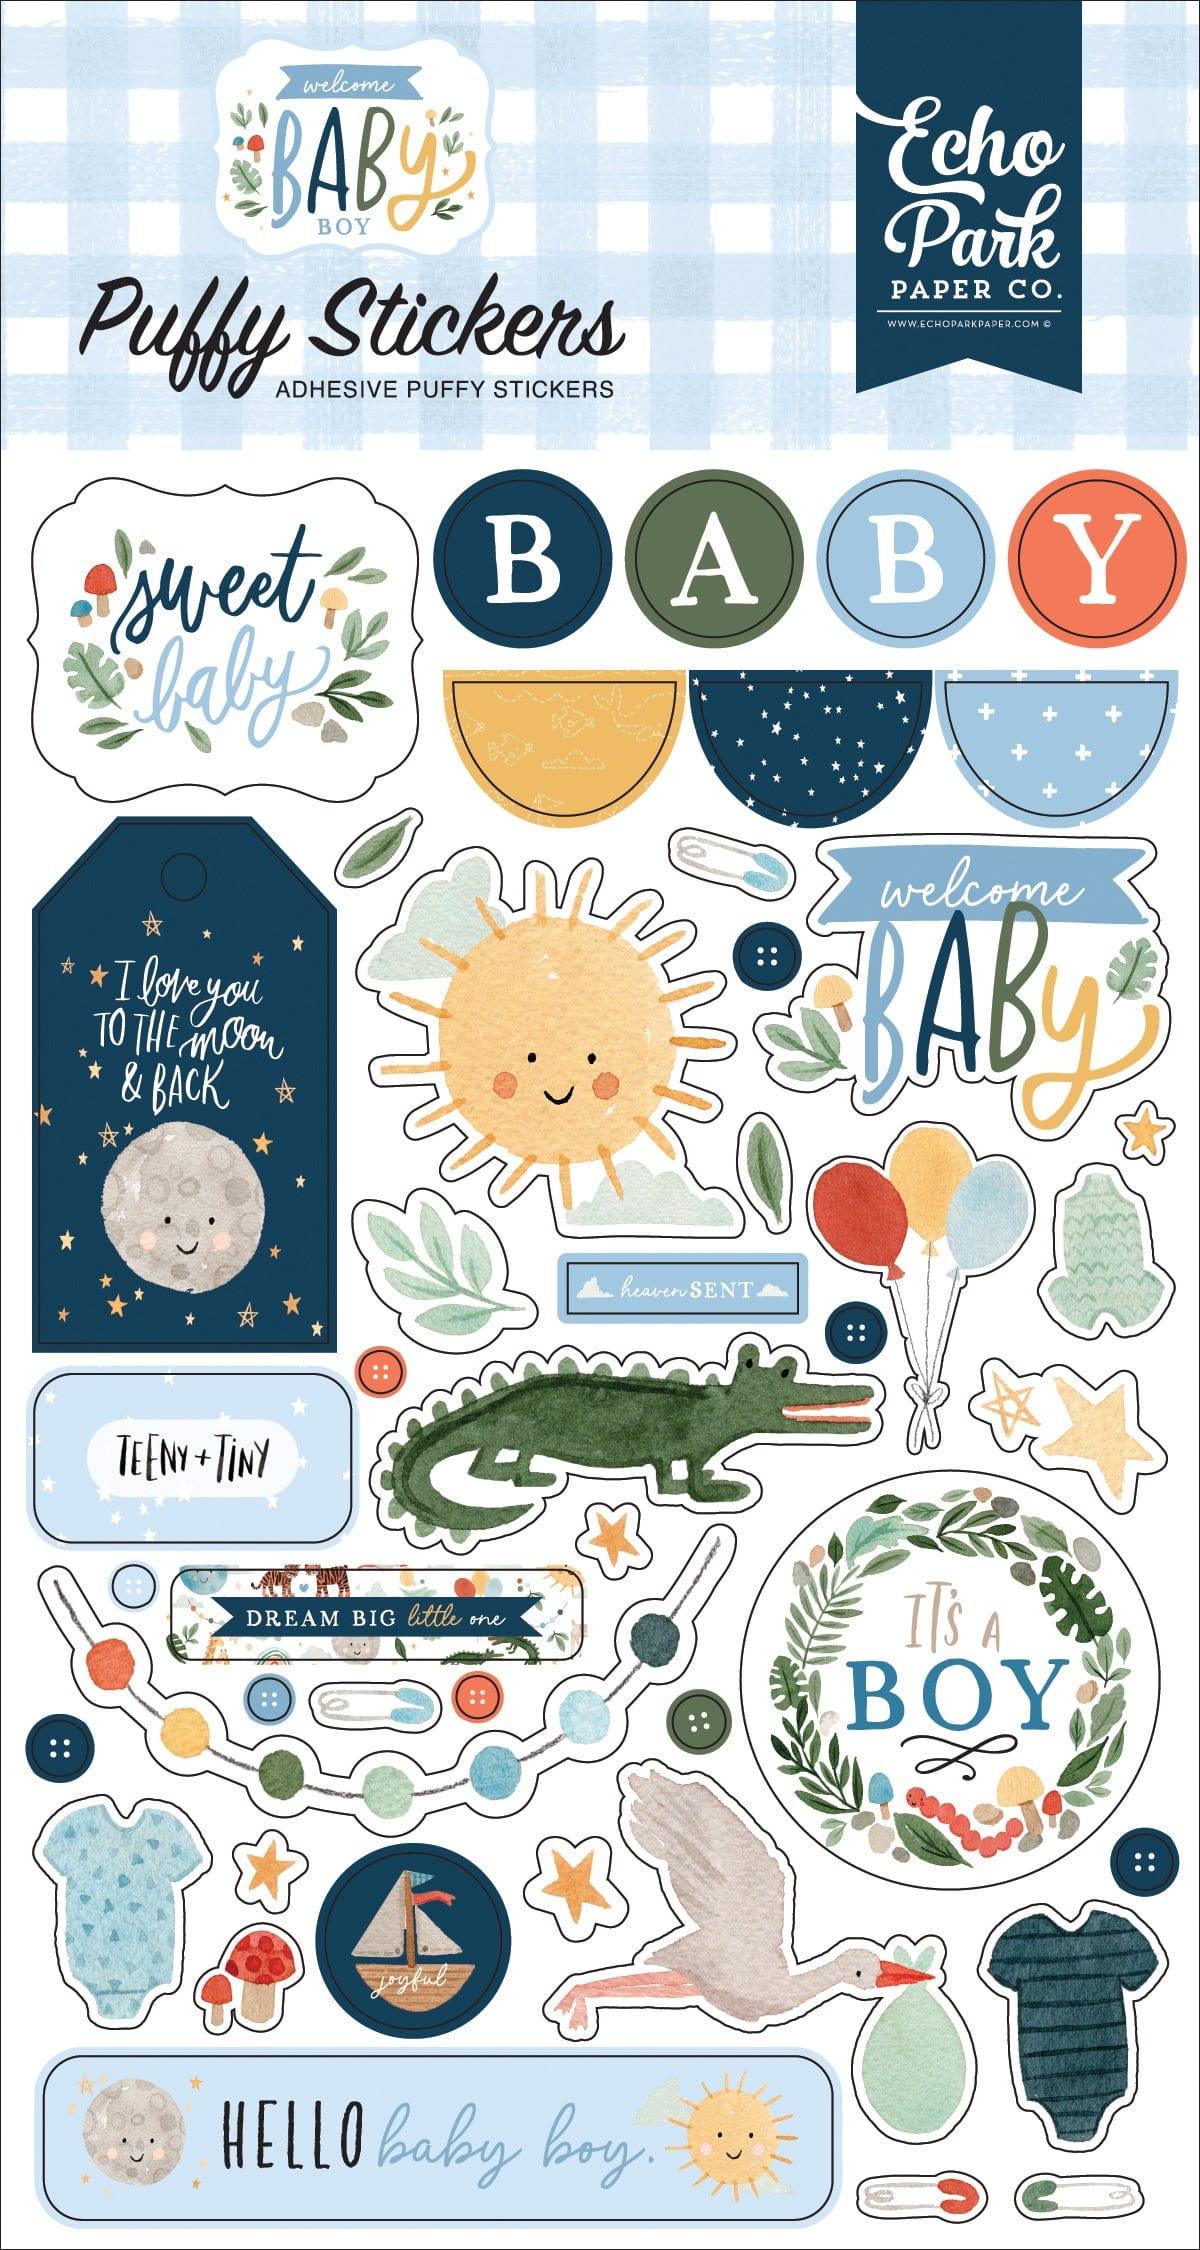 Welcome Baby Boy Collection 4 x 7 Puffy Stickers Scrapbook Embellishments by Echo Park Paper - Scrapbook Supply Companies